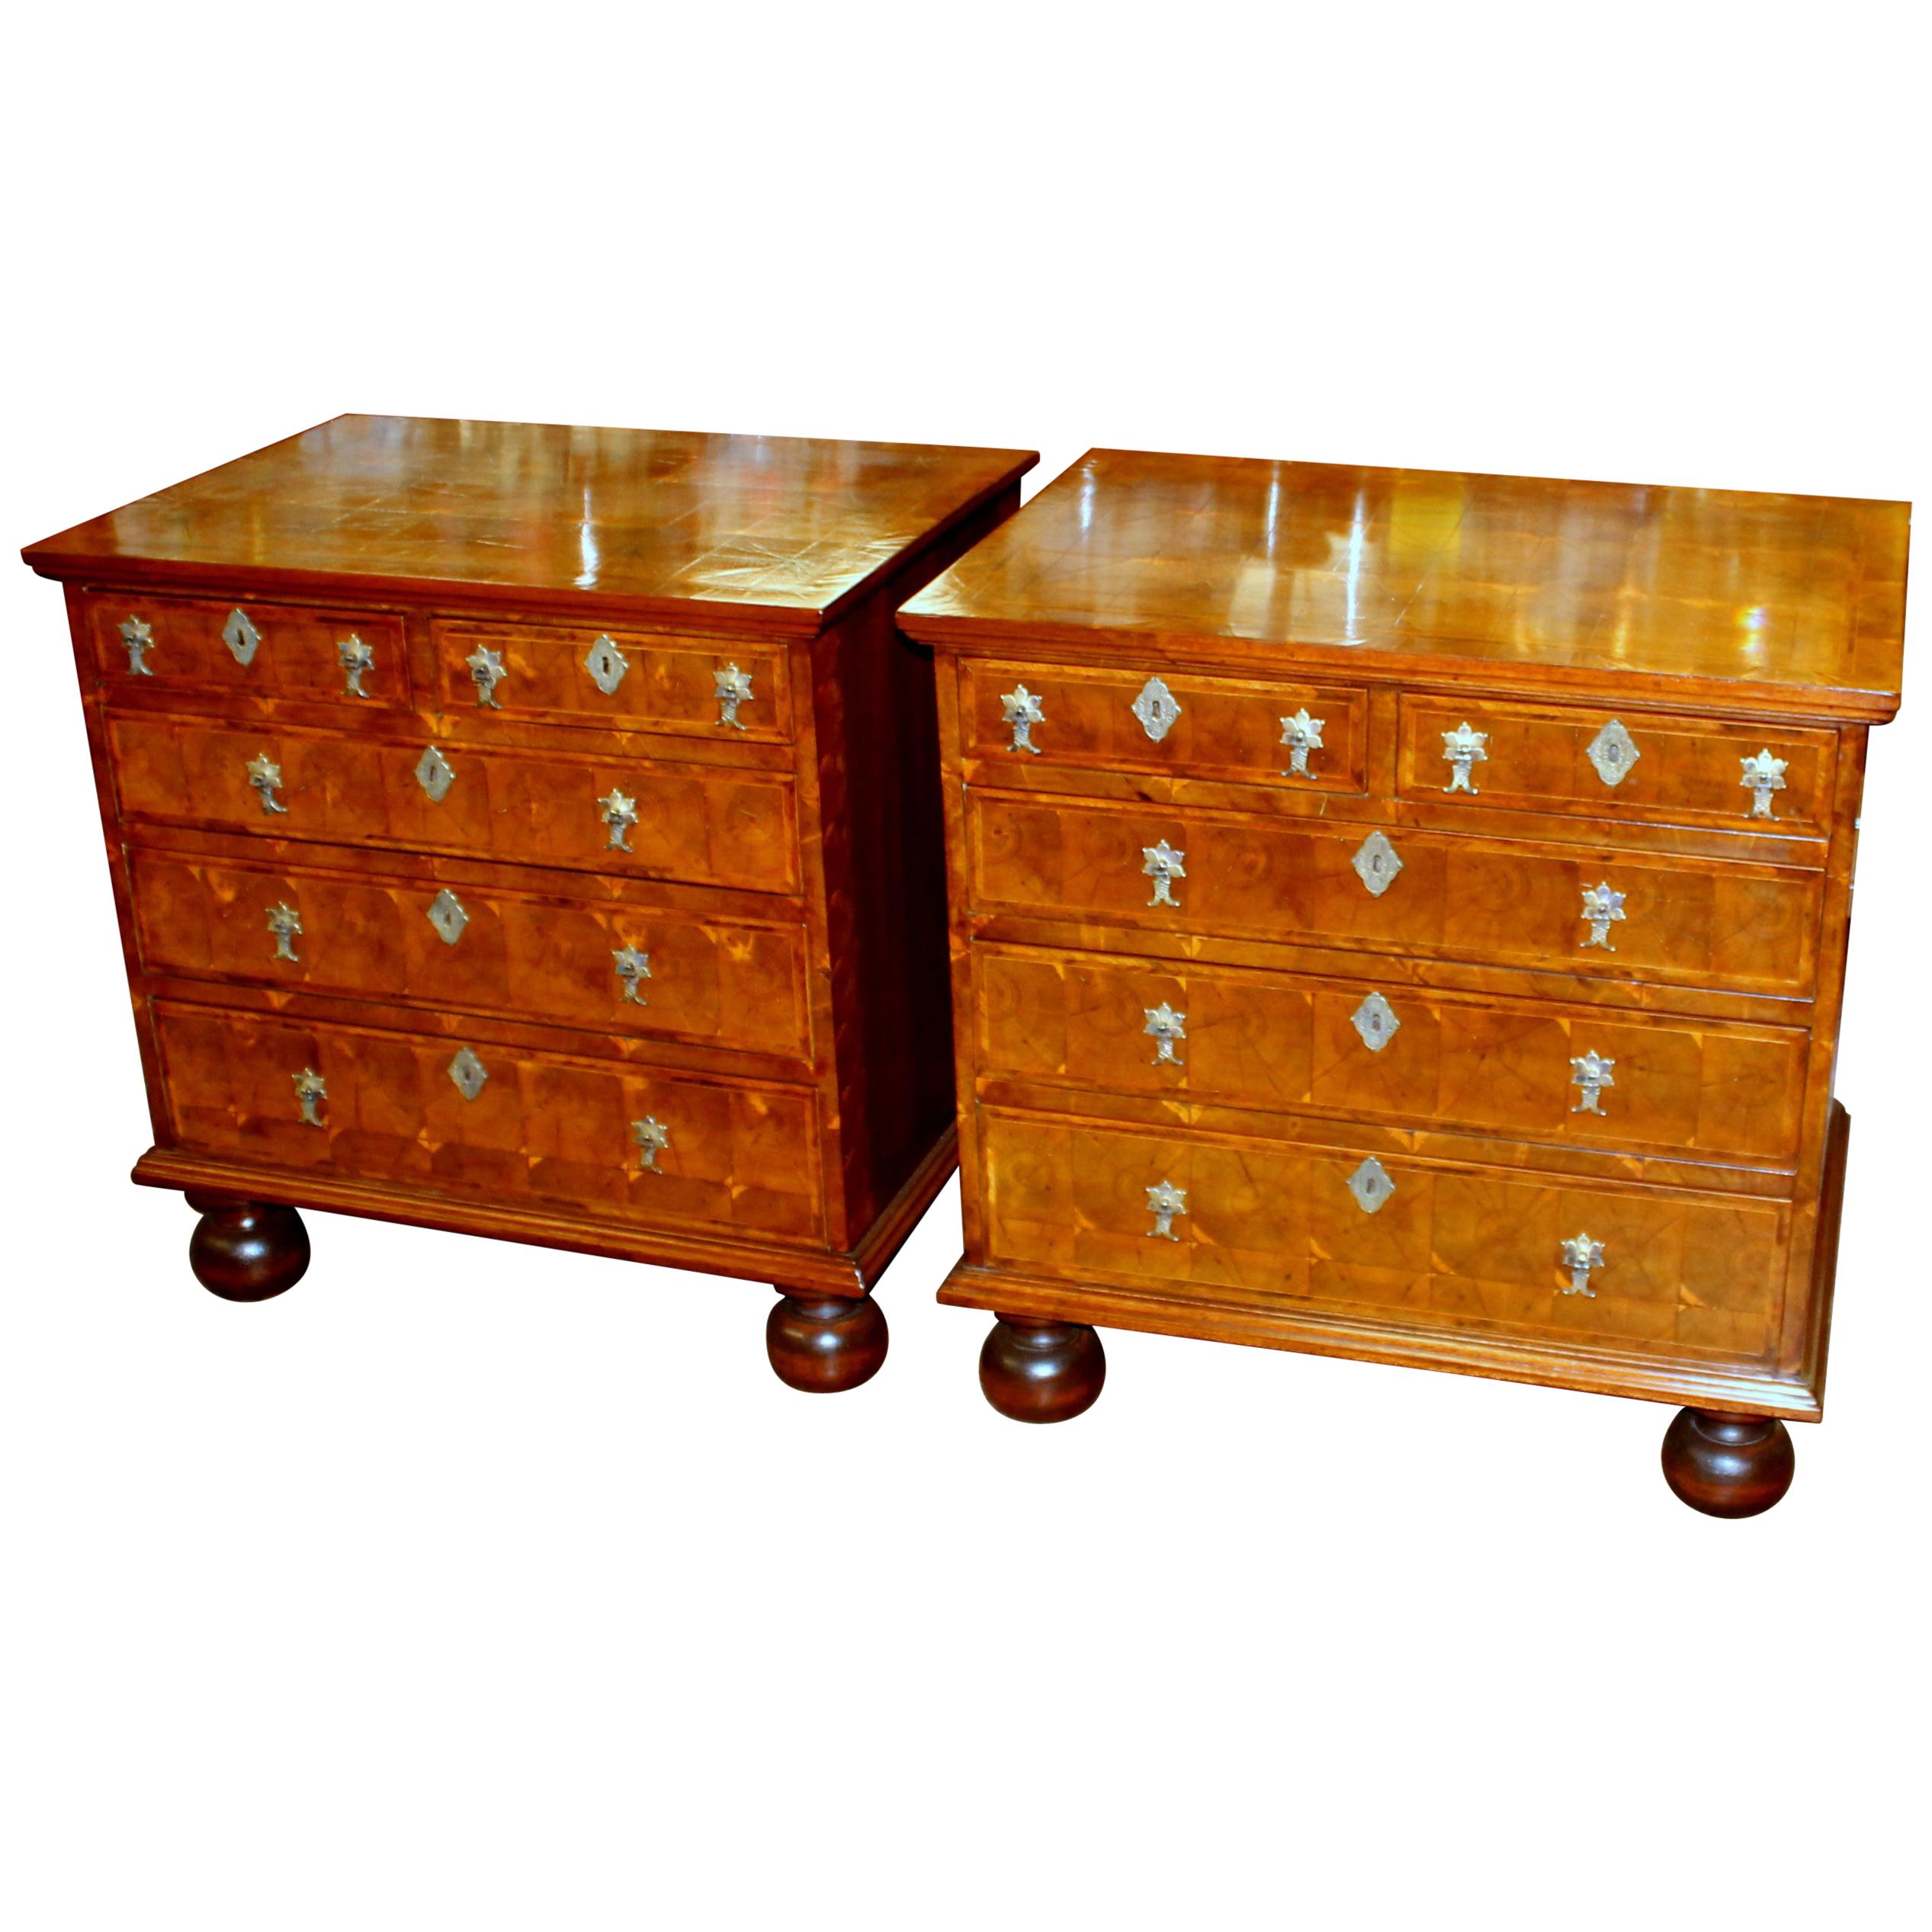 Pair of Antique English Q.A. Inlaid Laburnum Oyster Veneer Bachelor's Chests